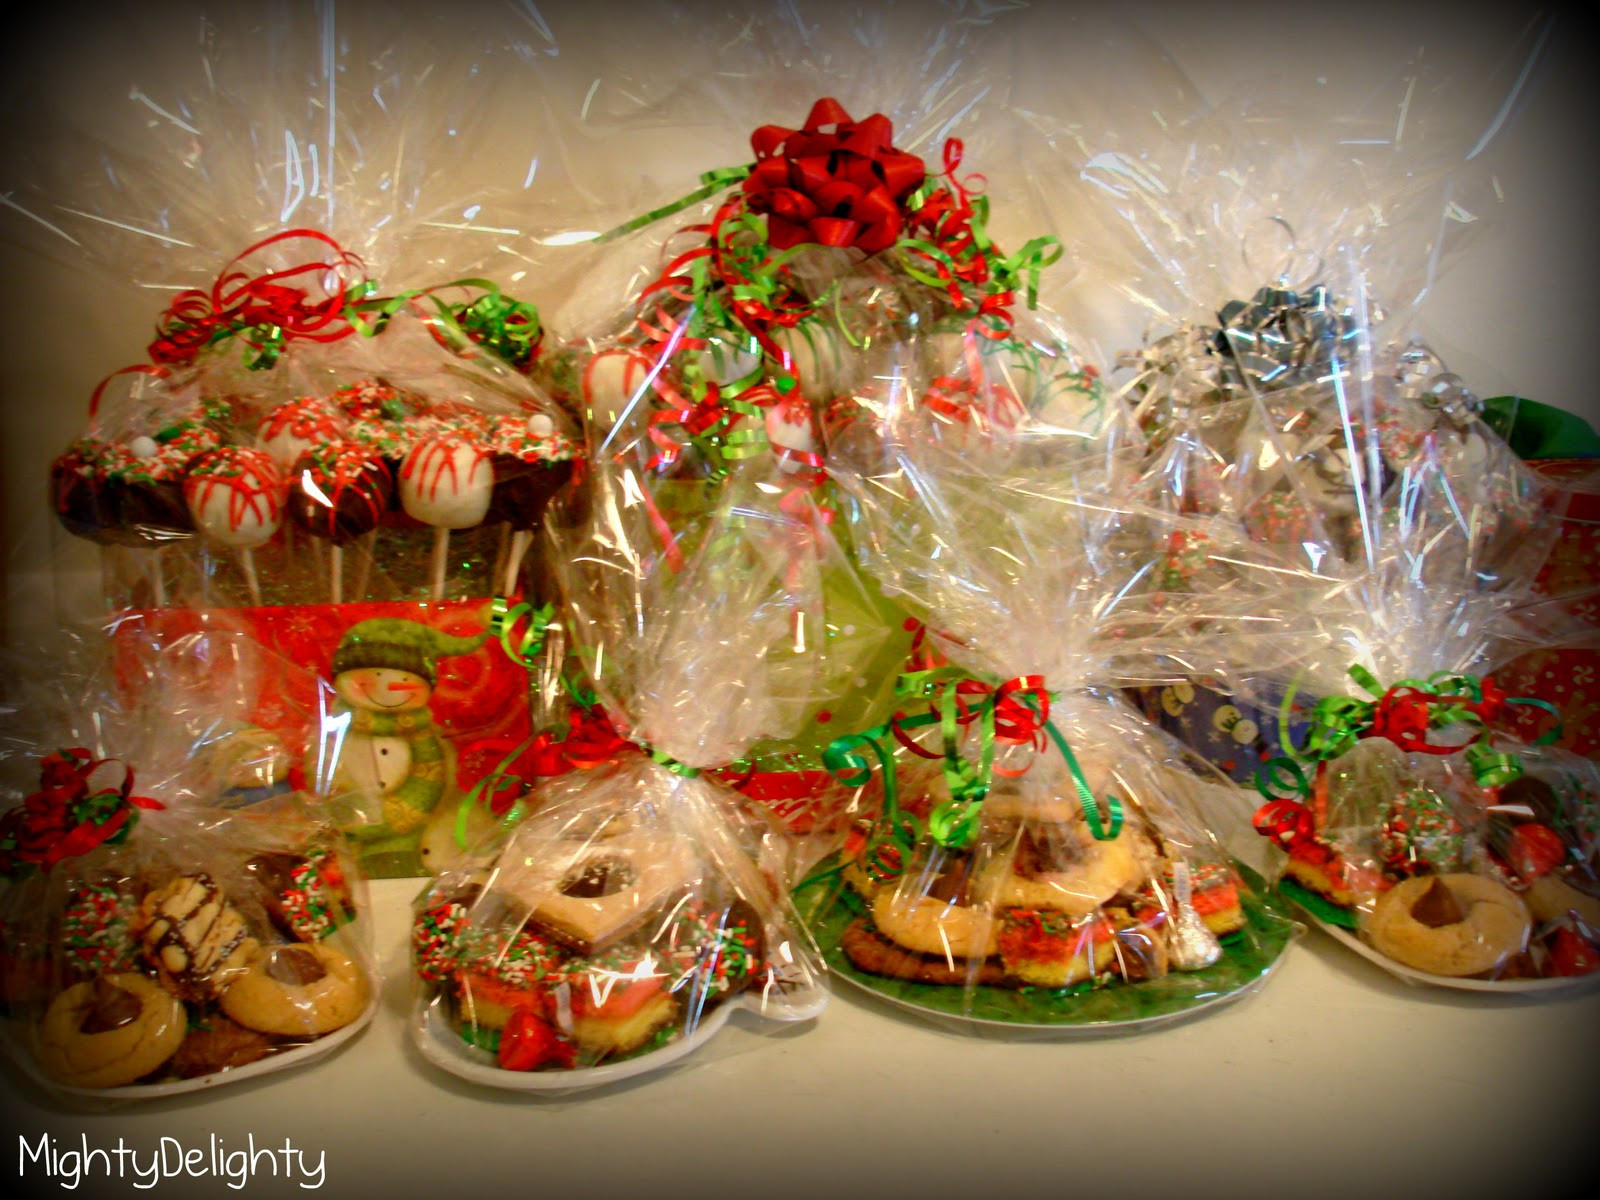 Holiday Baking Gift Ideas
 Mighty Delighty December 2011